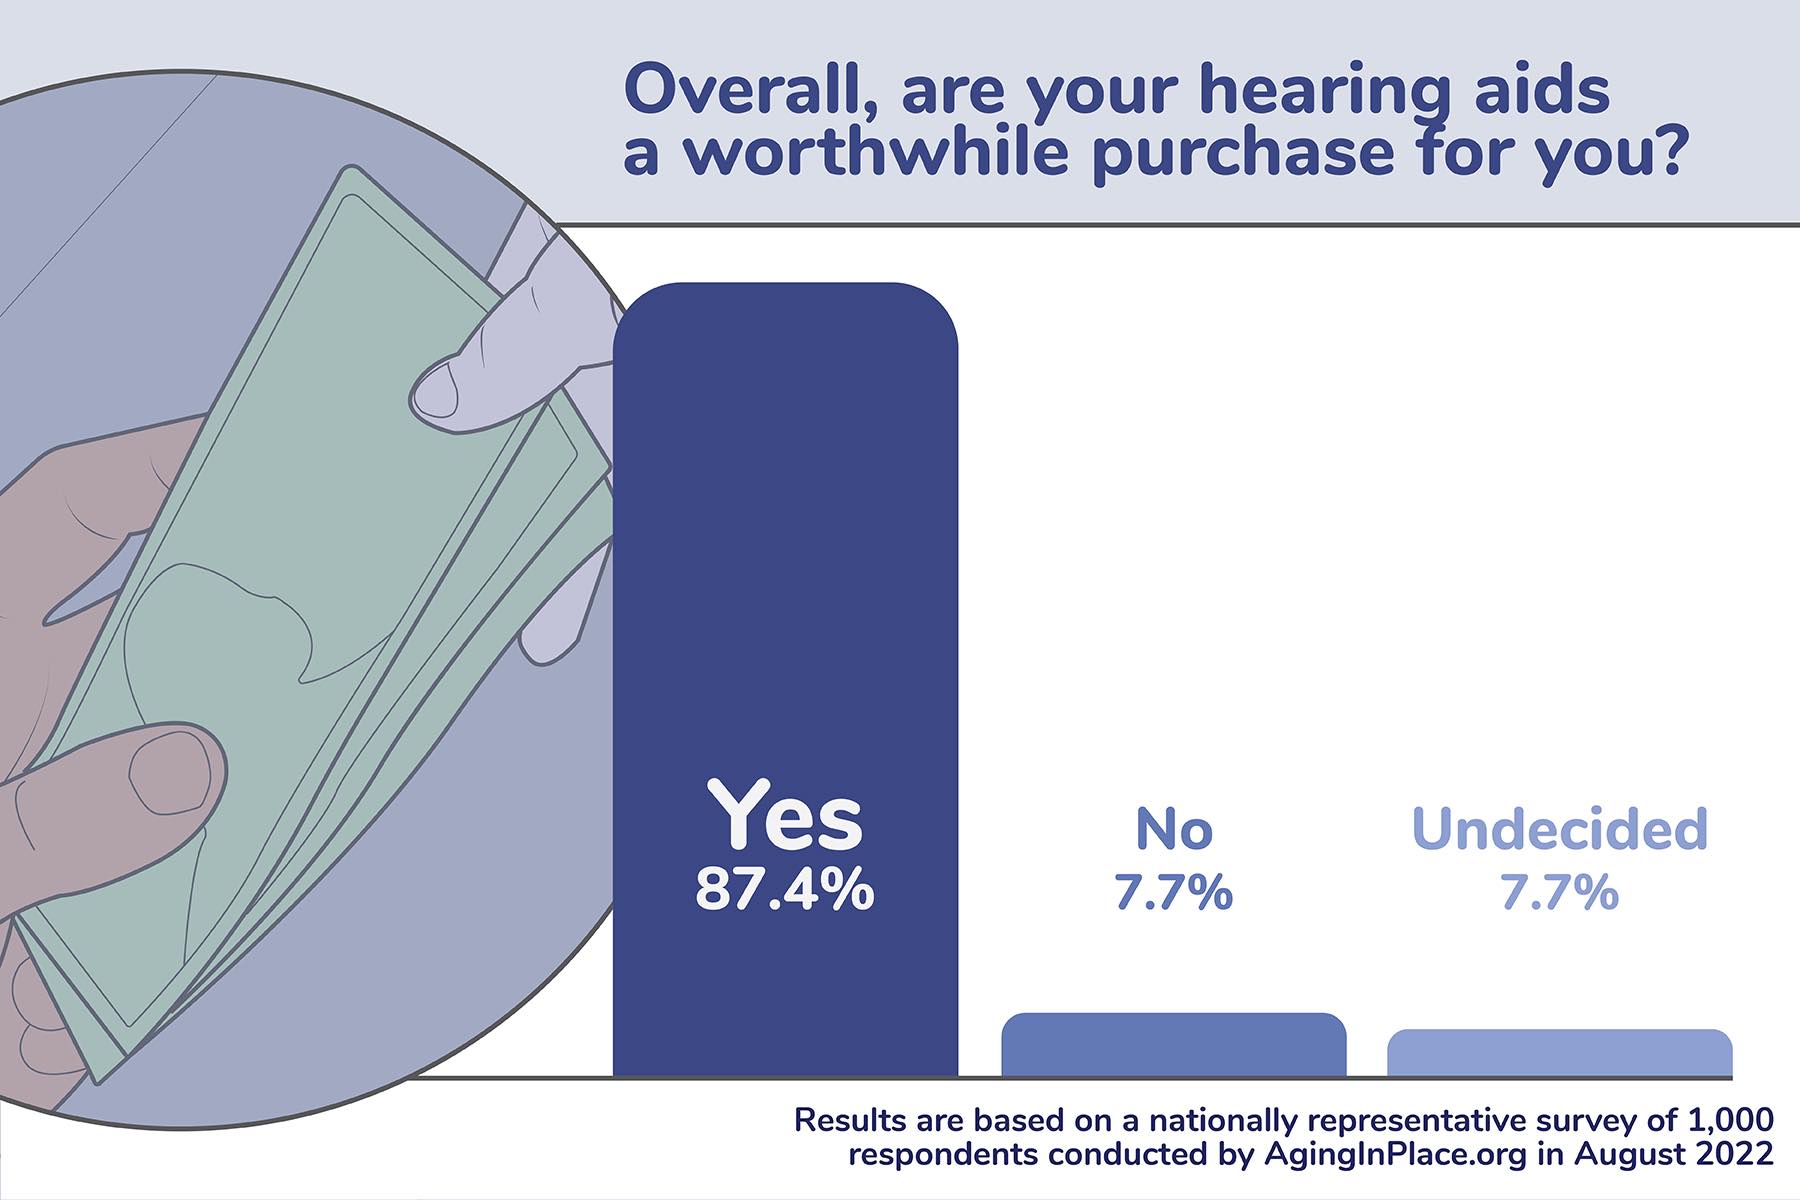 Are your hearing aids a worthwhile purchase infographic survey question